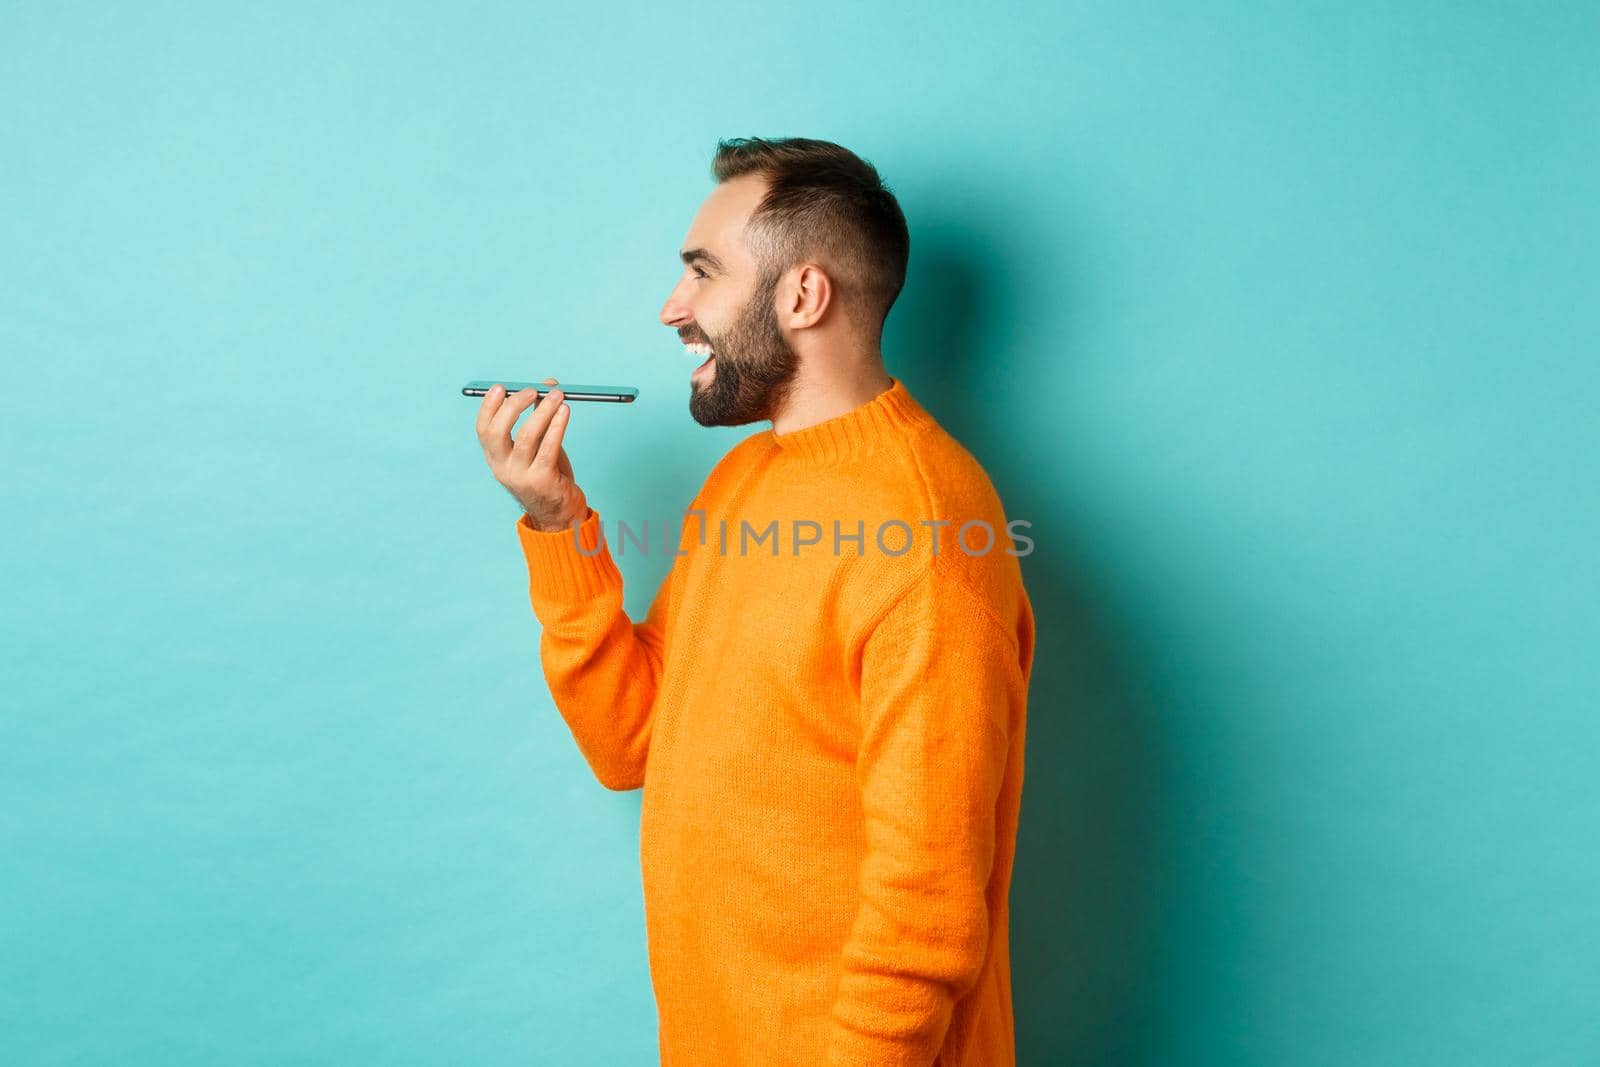 Profile of handsome bearded man recording voice message, holding mobile phone and talking on speakerphone, smiling happy, standing against turquoise background.